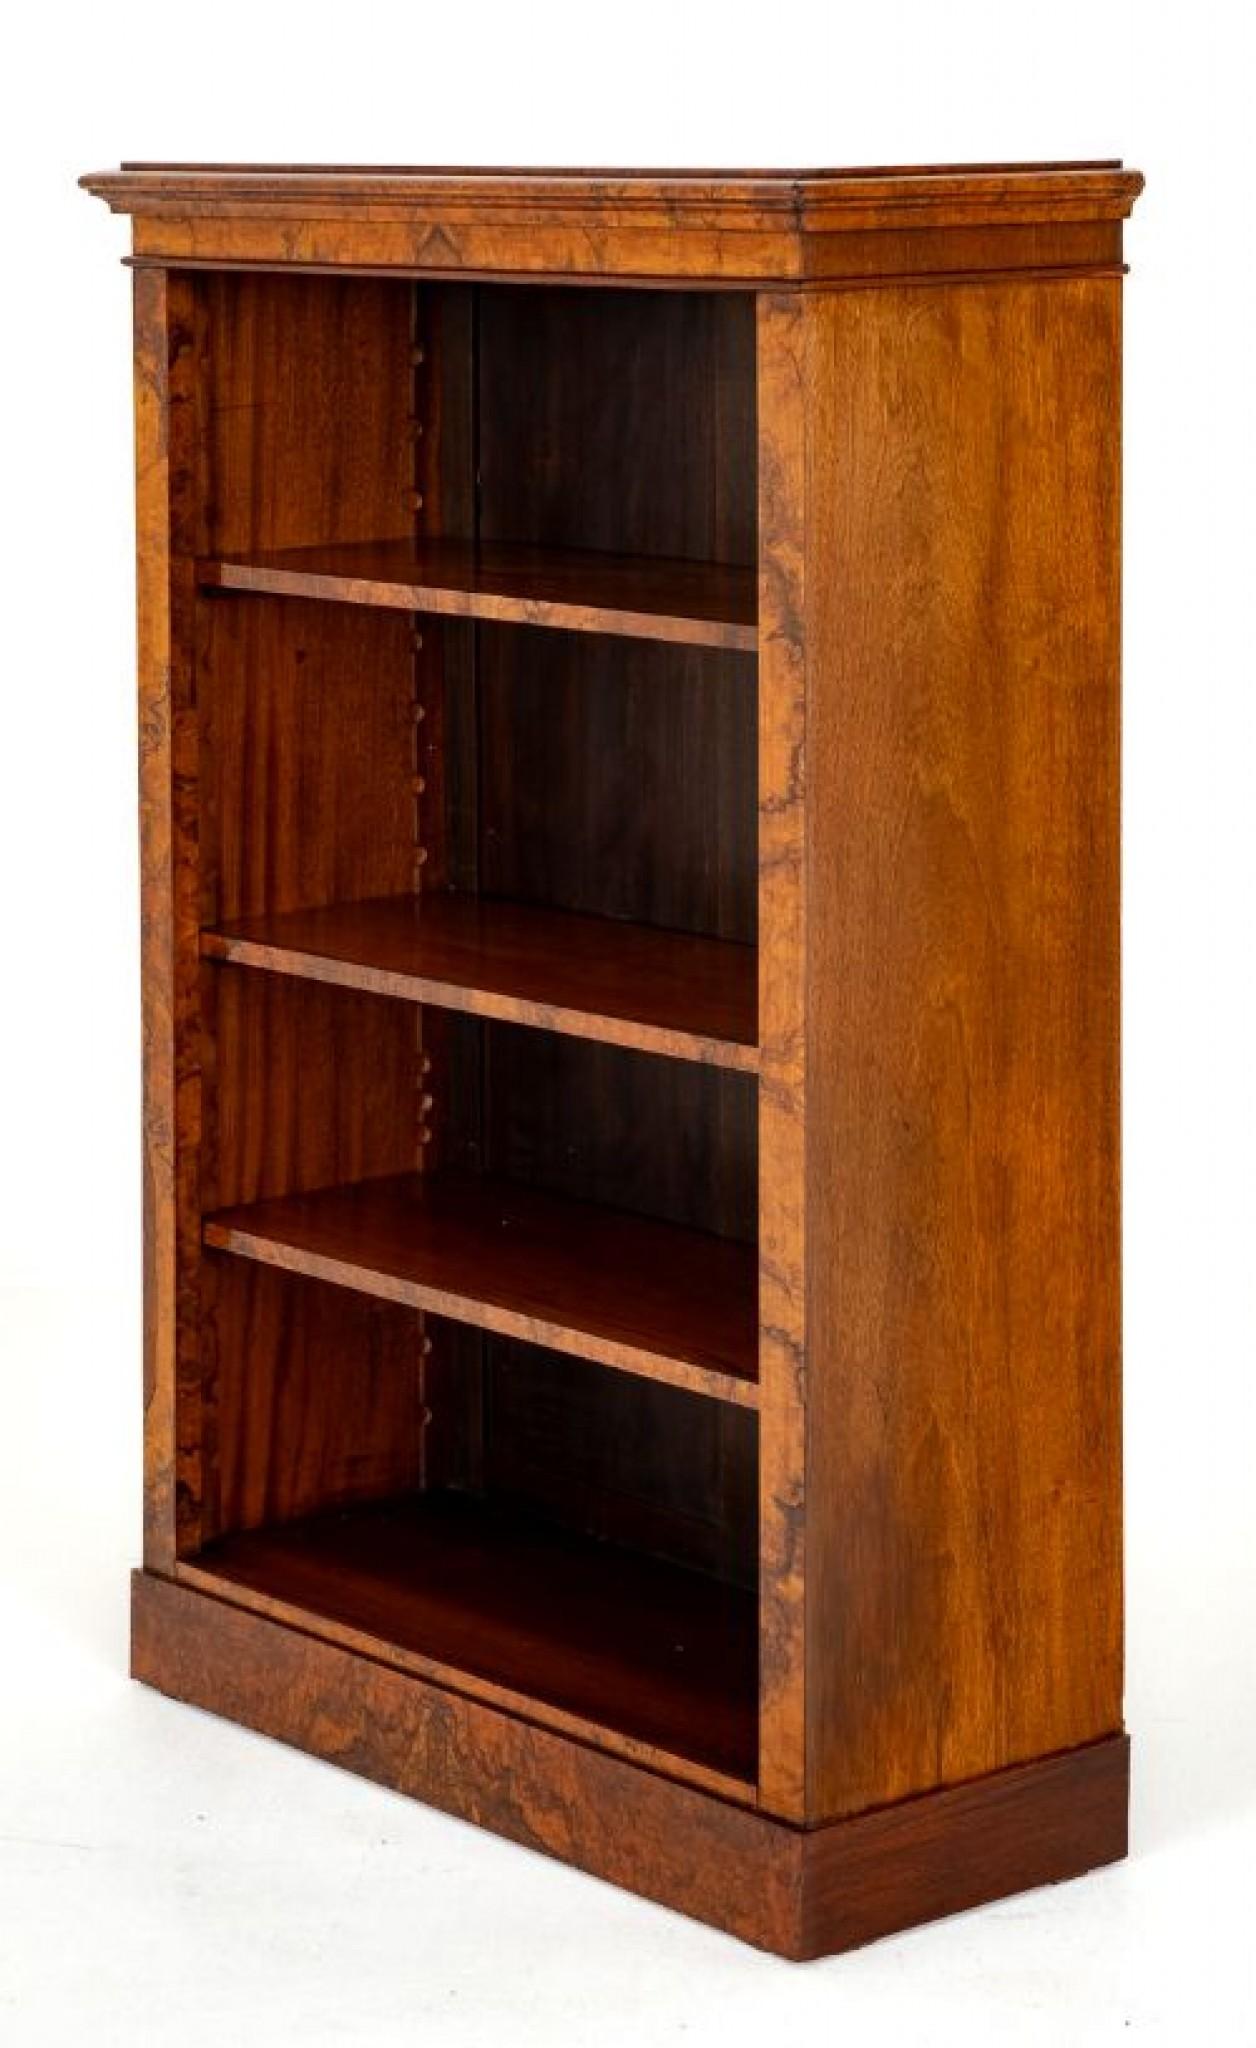 Victorian Burr Walnut Open Bookcase.
This Bookcase is of a Typical Victorian Form.
Standing on a Plinth Base.
Circa 1860
The Bookcase Features 3 Adjustable Shelves.
The Whole of the Bookcase Having Wonderful Burr Walnut Timbers.
Presented in good